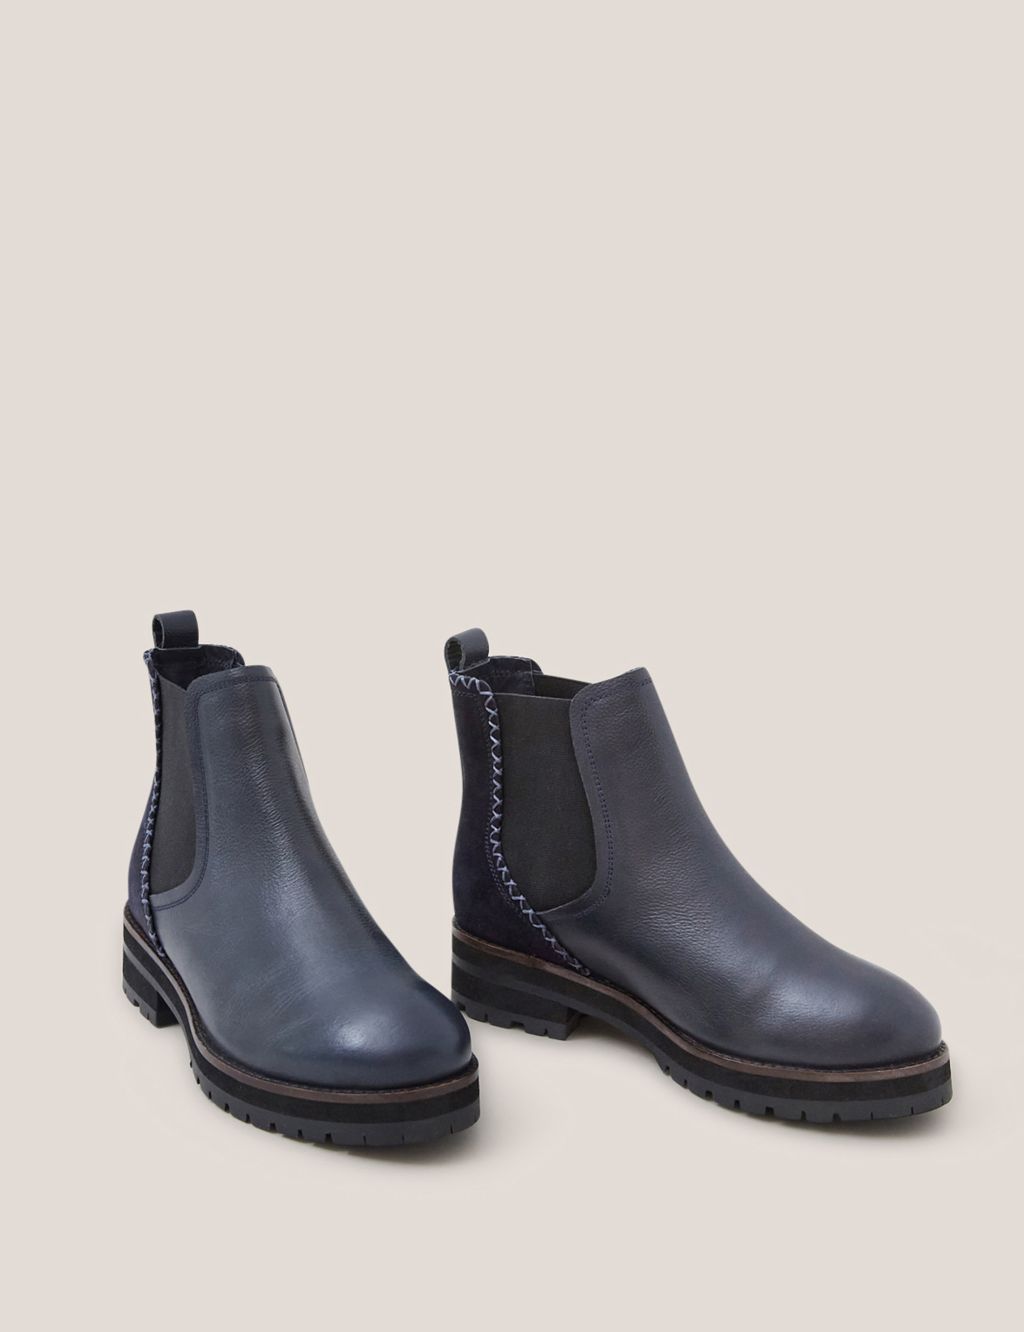 Wide Fit Leather Chelsea Boots image 2